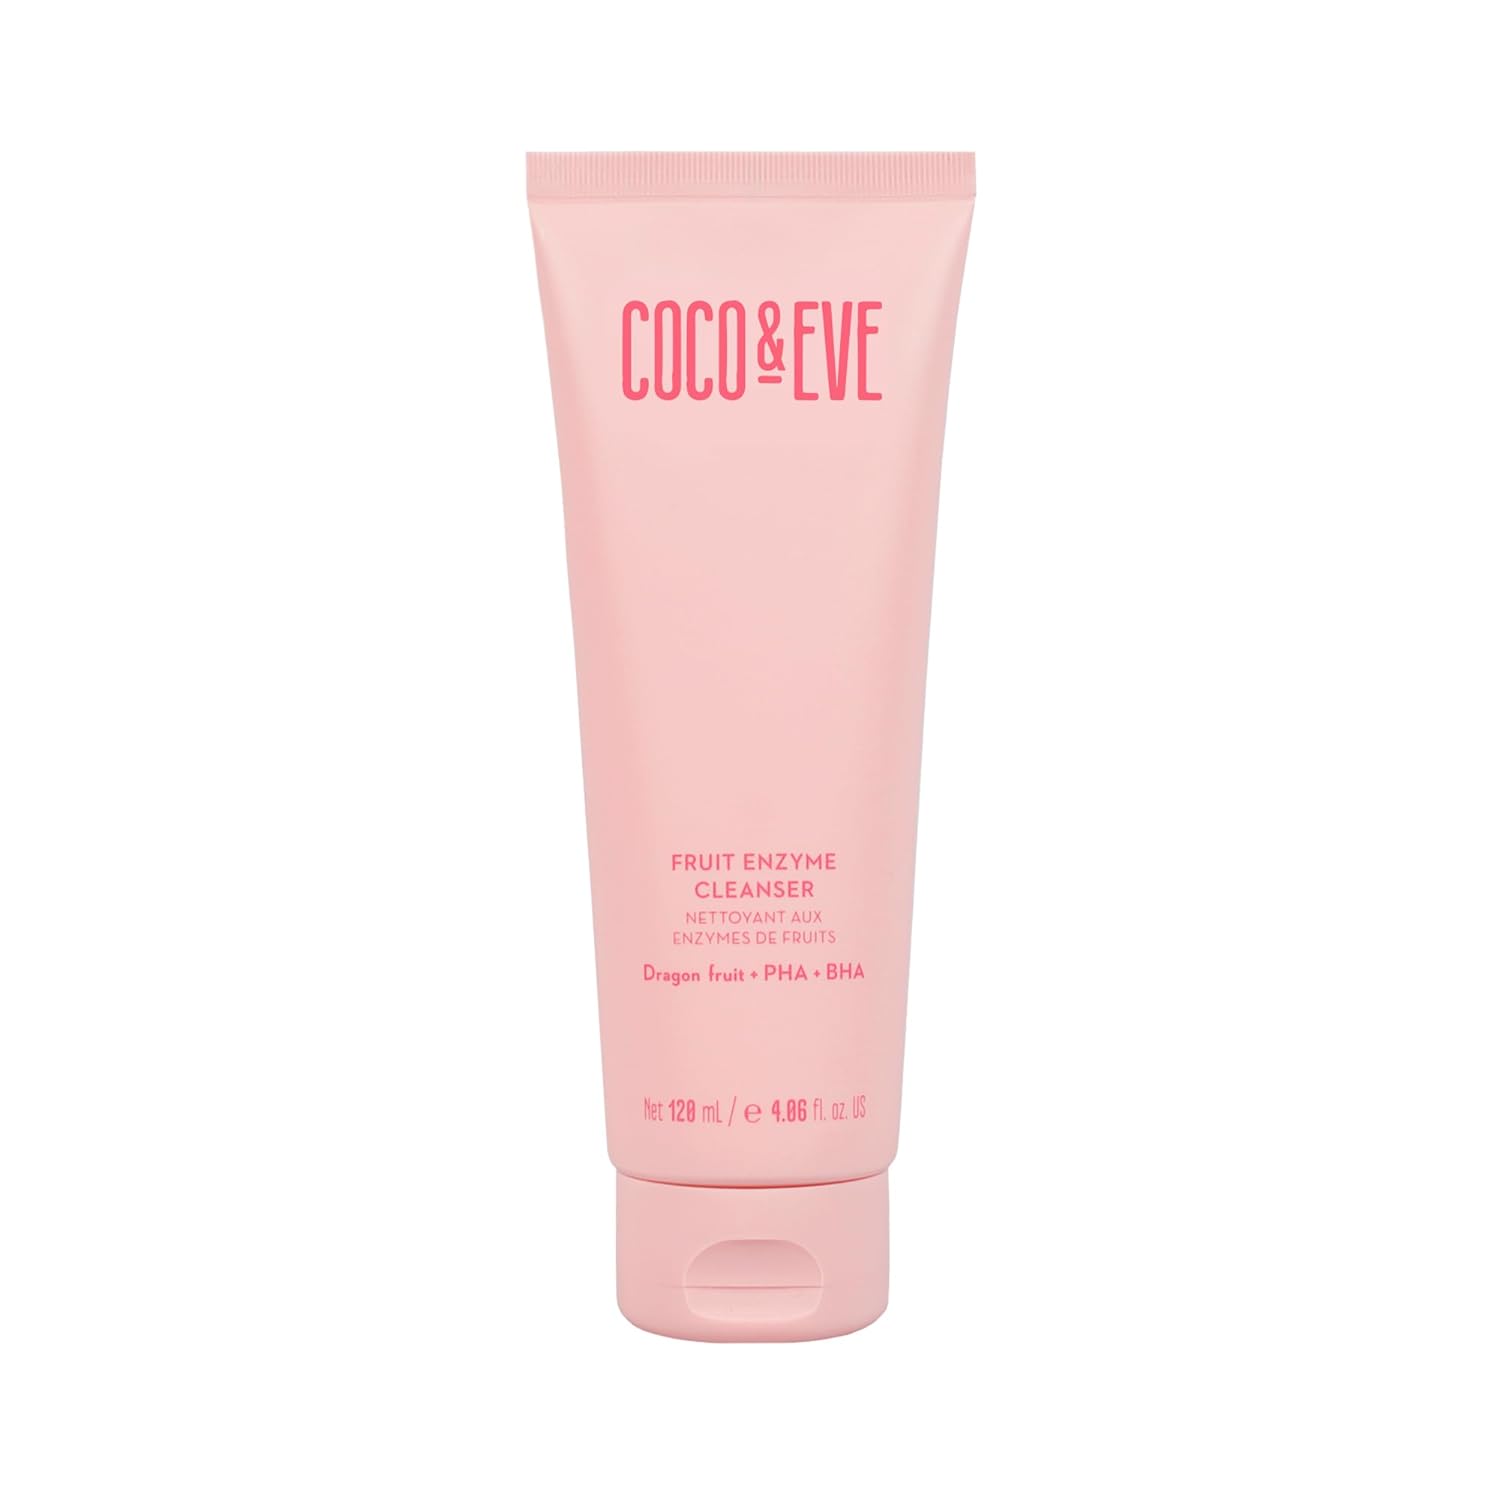 Coco & Eve Fruit Enzyme Cleanser. Water Based Gentle cleanser for Radiant Complexion. Refines Pores, Exfoliates and Moistuizes Skin. BHA, Prebiotic, Papaya Enzyme & Vitamin E (4.06 fl oz / 120ml)